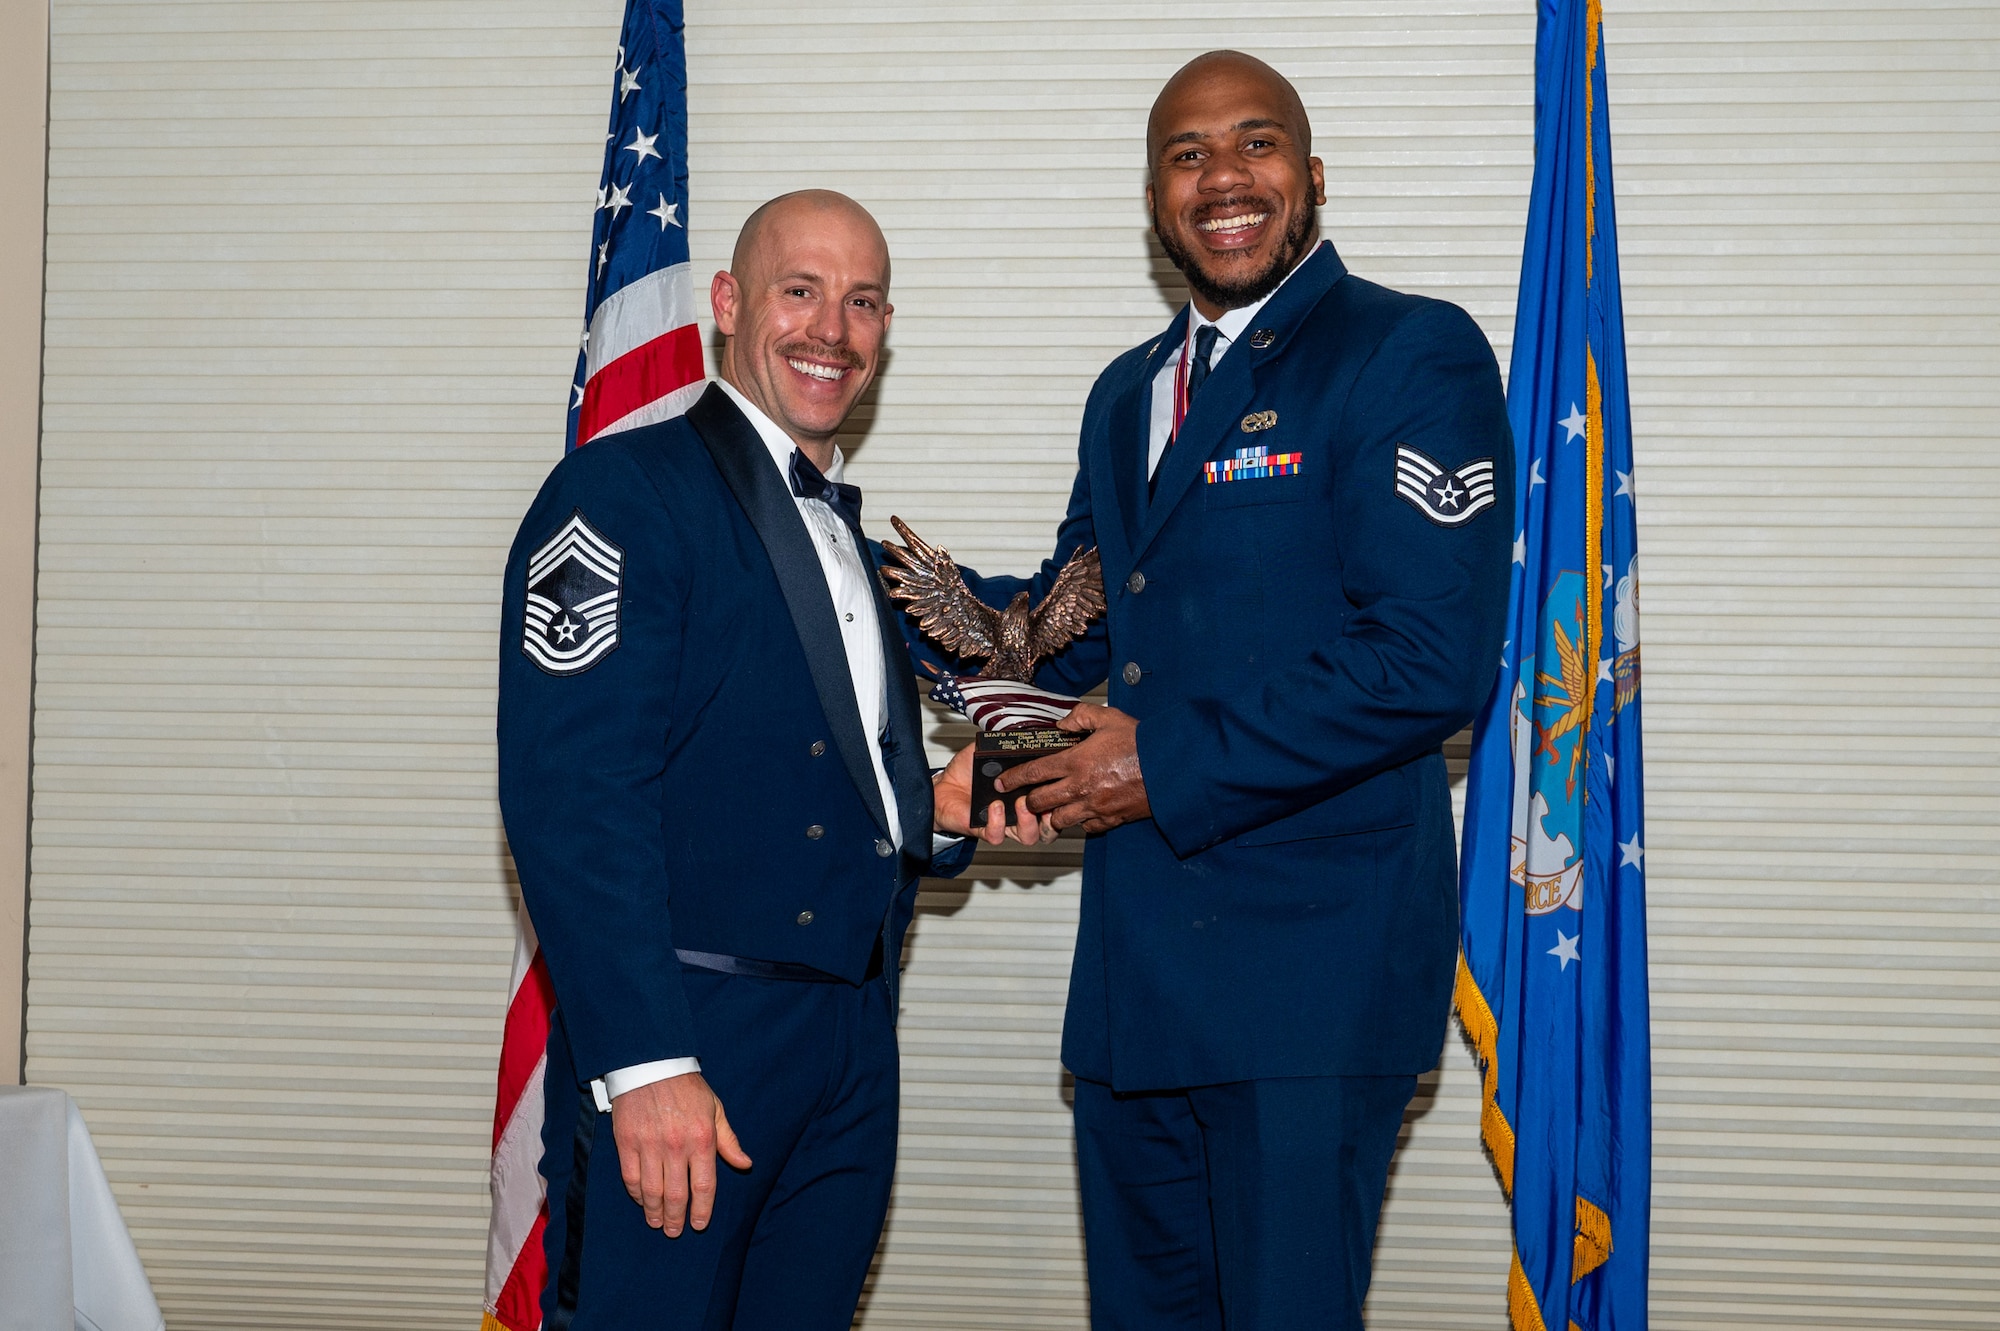 Staff Sgt. Nijel Freeman, assigned to the 4th Component Maintenance Squadron, right, receives the John L. Levitow Award from Chief Master Sgt. Austin Sutton, 4th Operations Support Squadron senior enlisted leader, during the Airman Leadership School class 24-C graduation ceremony at Seymour Johnson Air Force Base, North Carolina, Mar. 20, 2024. The John L. Levitow Award is the highest honor that can be earned by an Enlisted Professional Military Education graduate. (U.S. Air Force photo by Airman Rebecca Tierney)